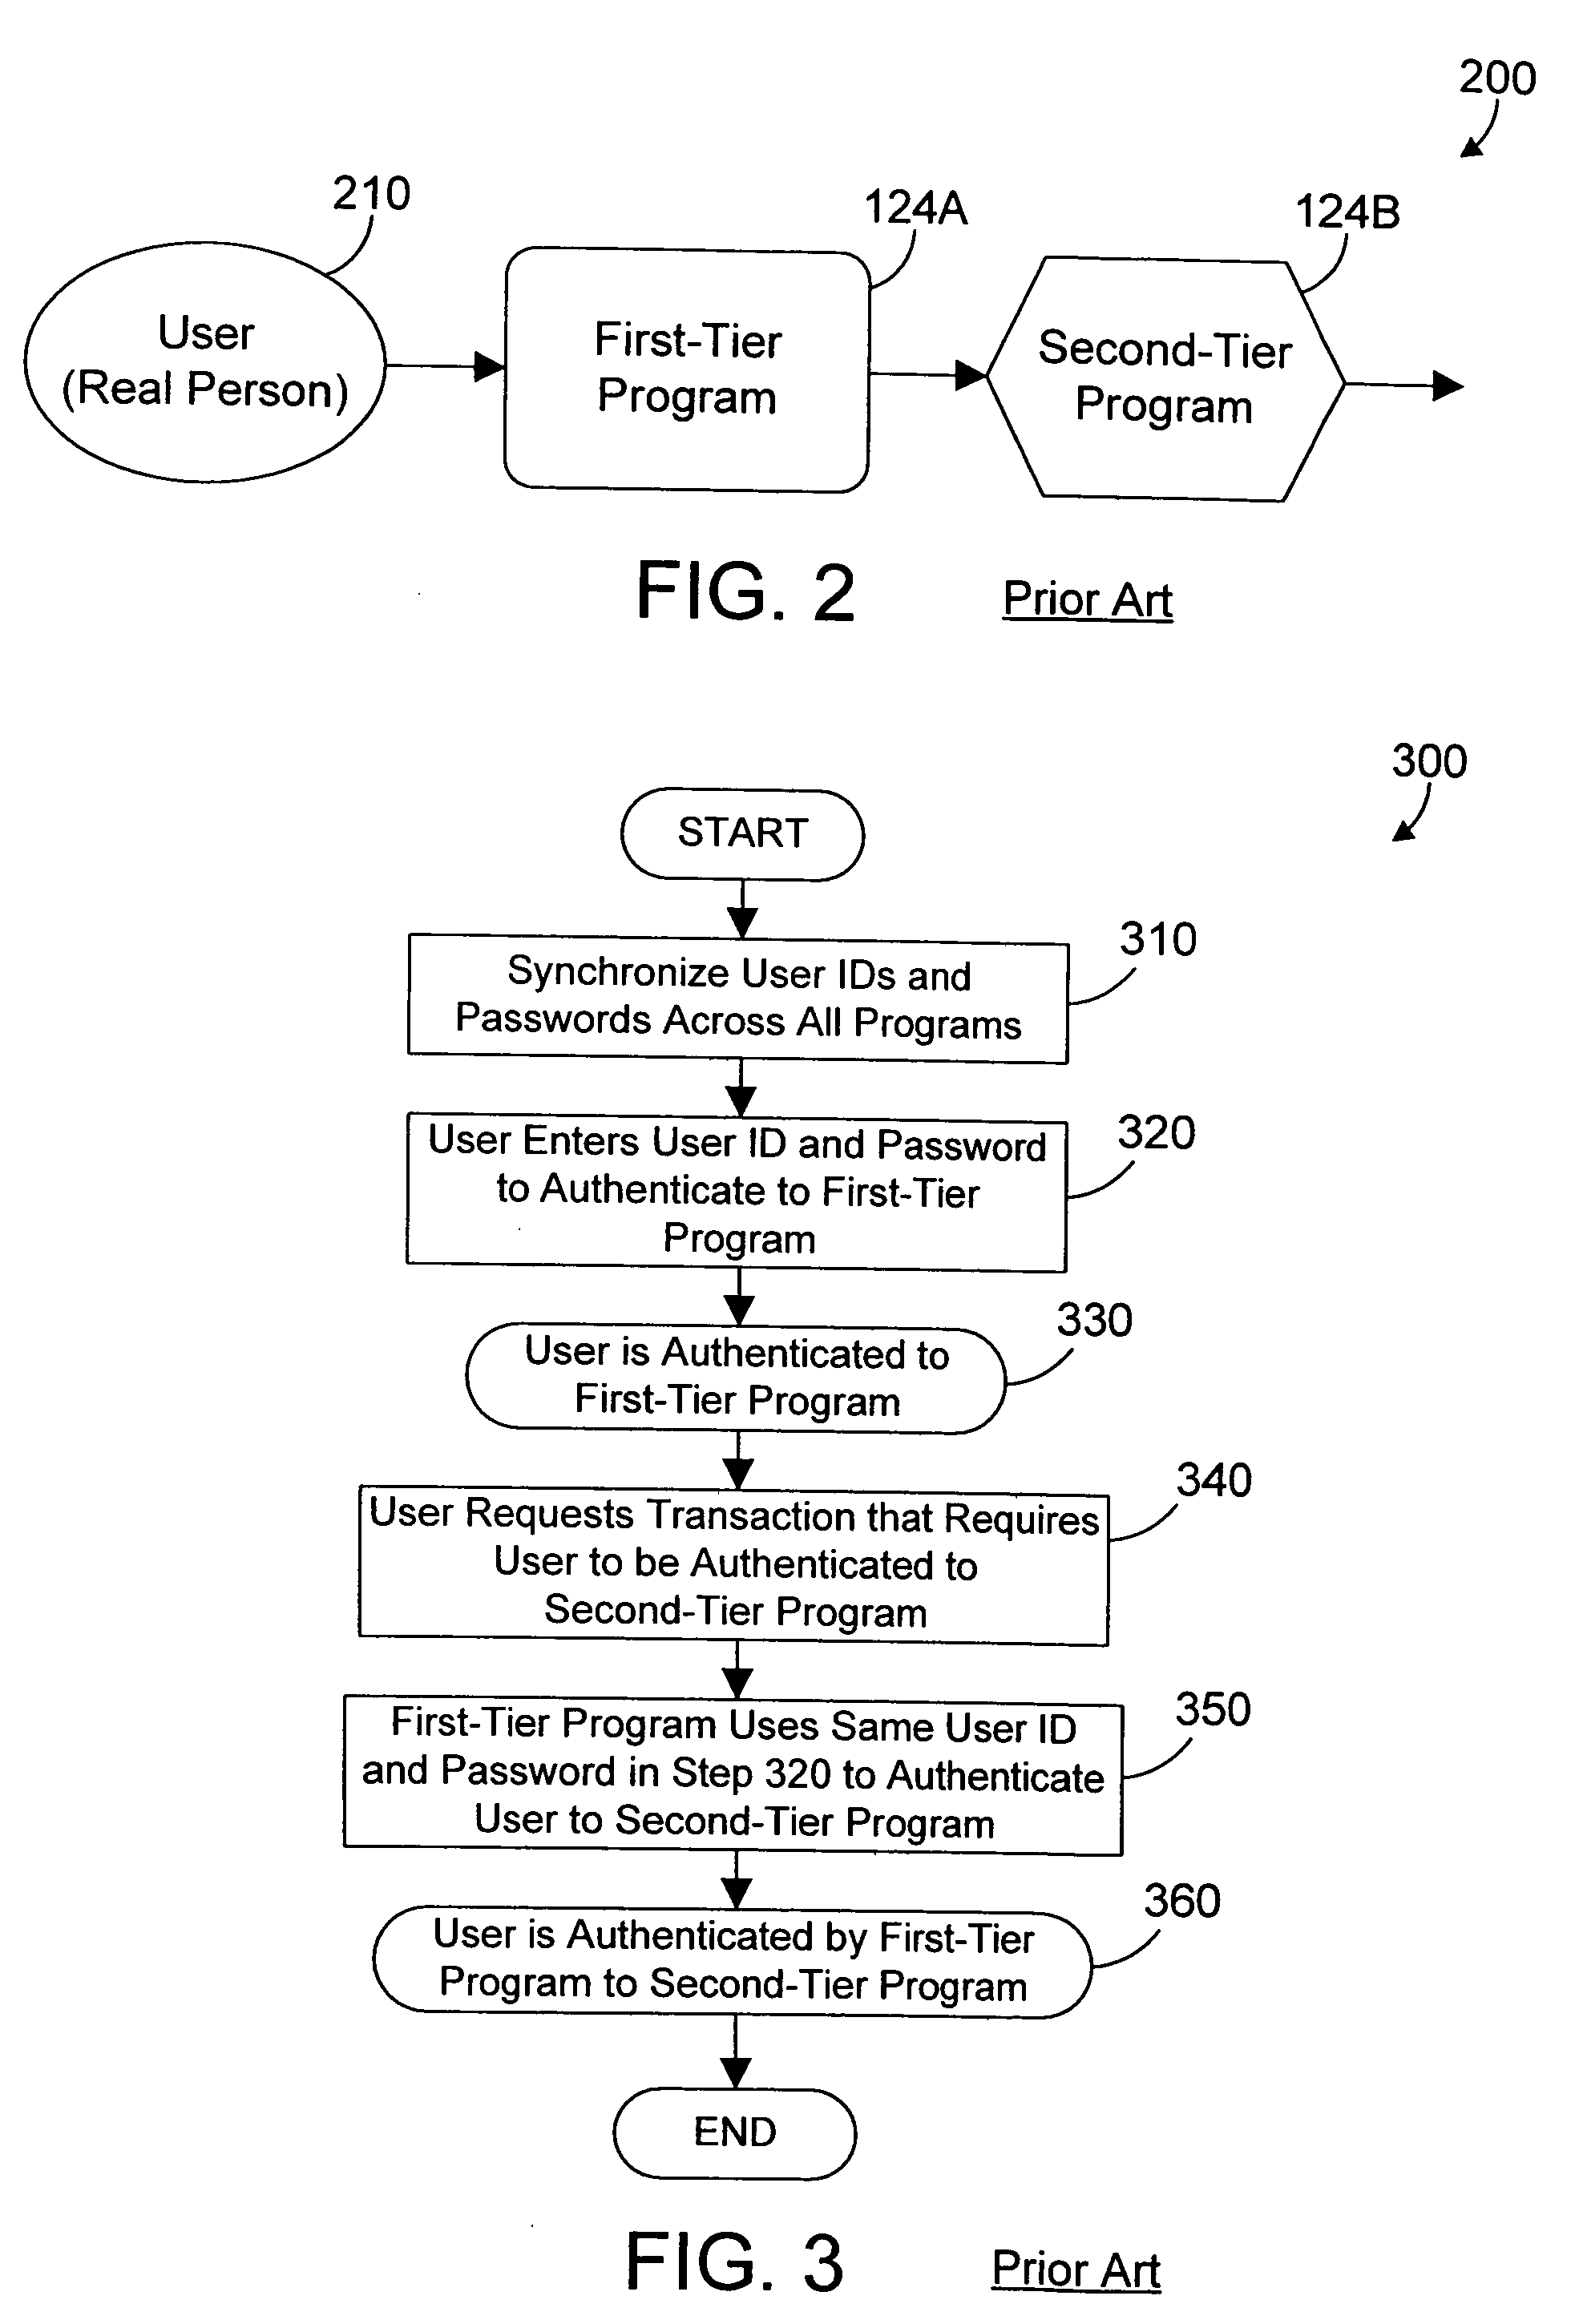 Apparatus and method for inter-program authentication using dynamically-generated public/private key pairs